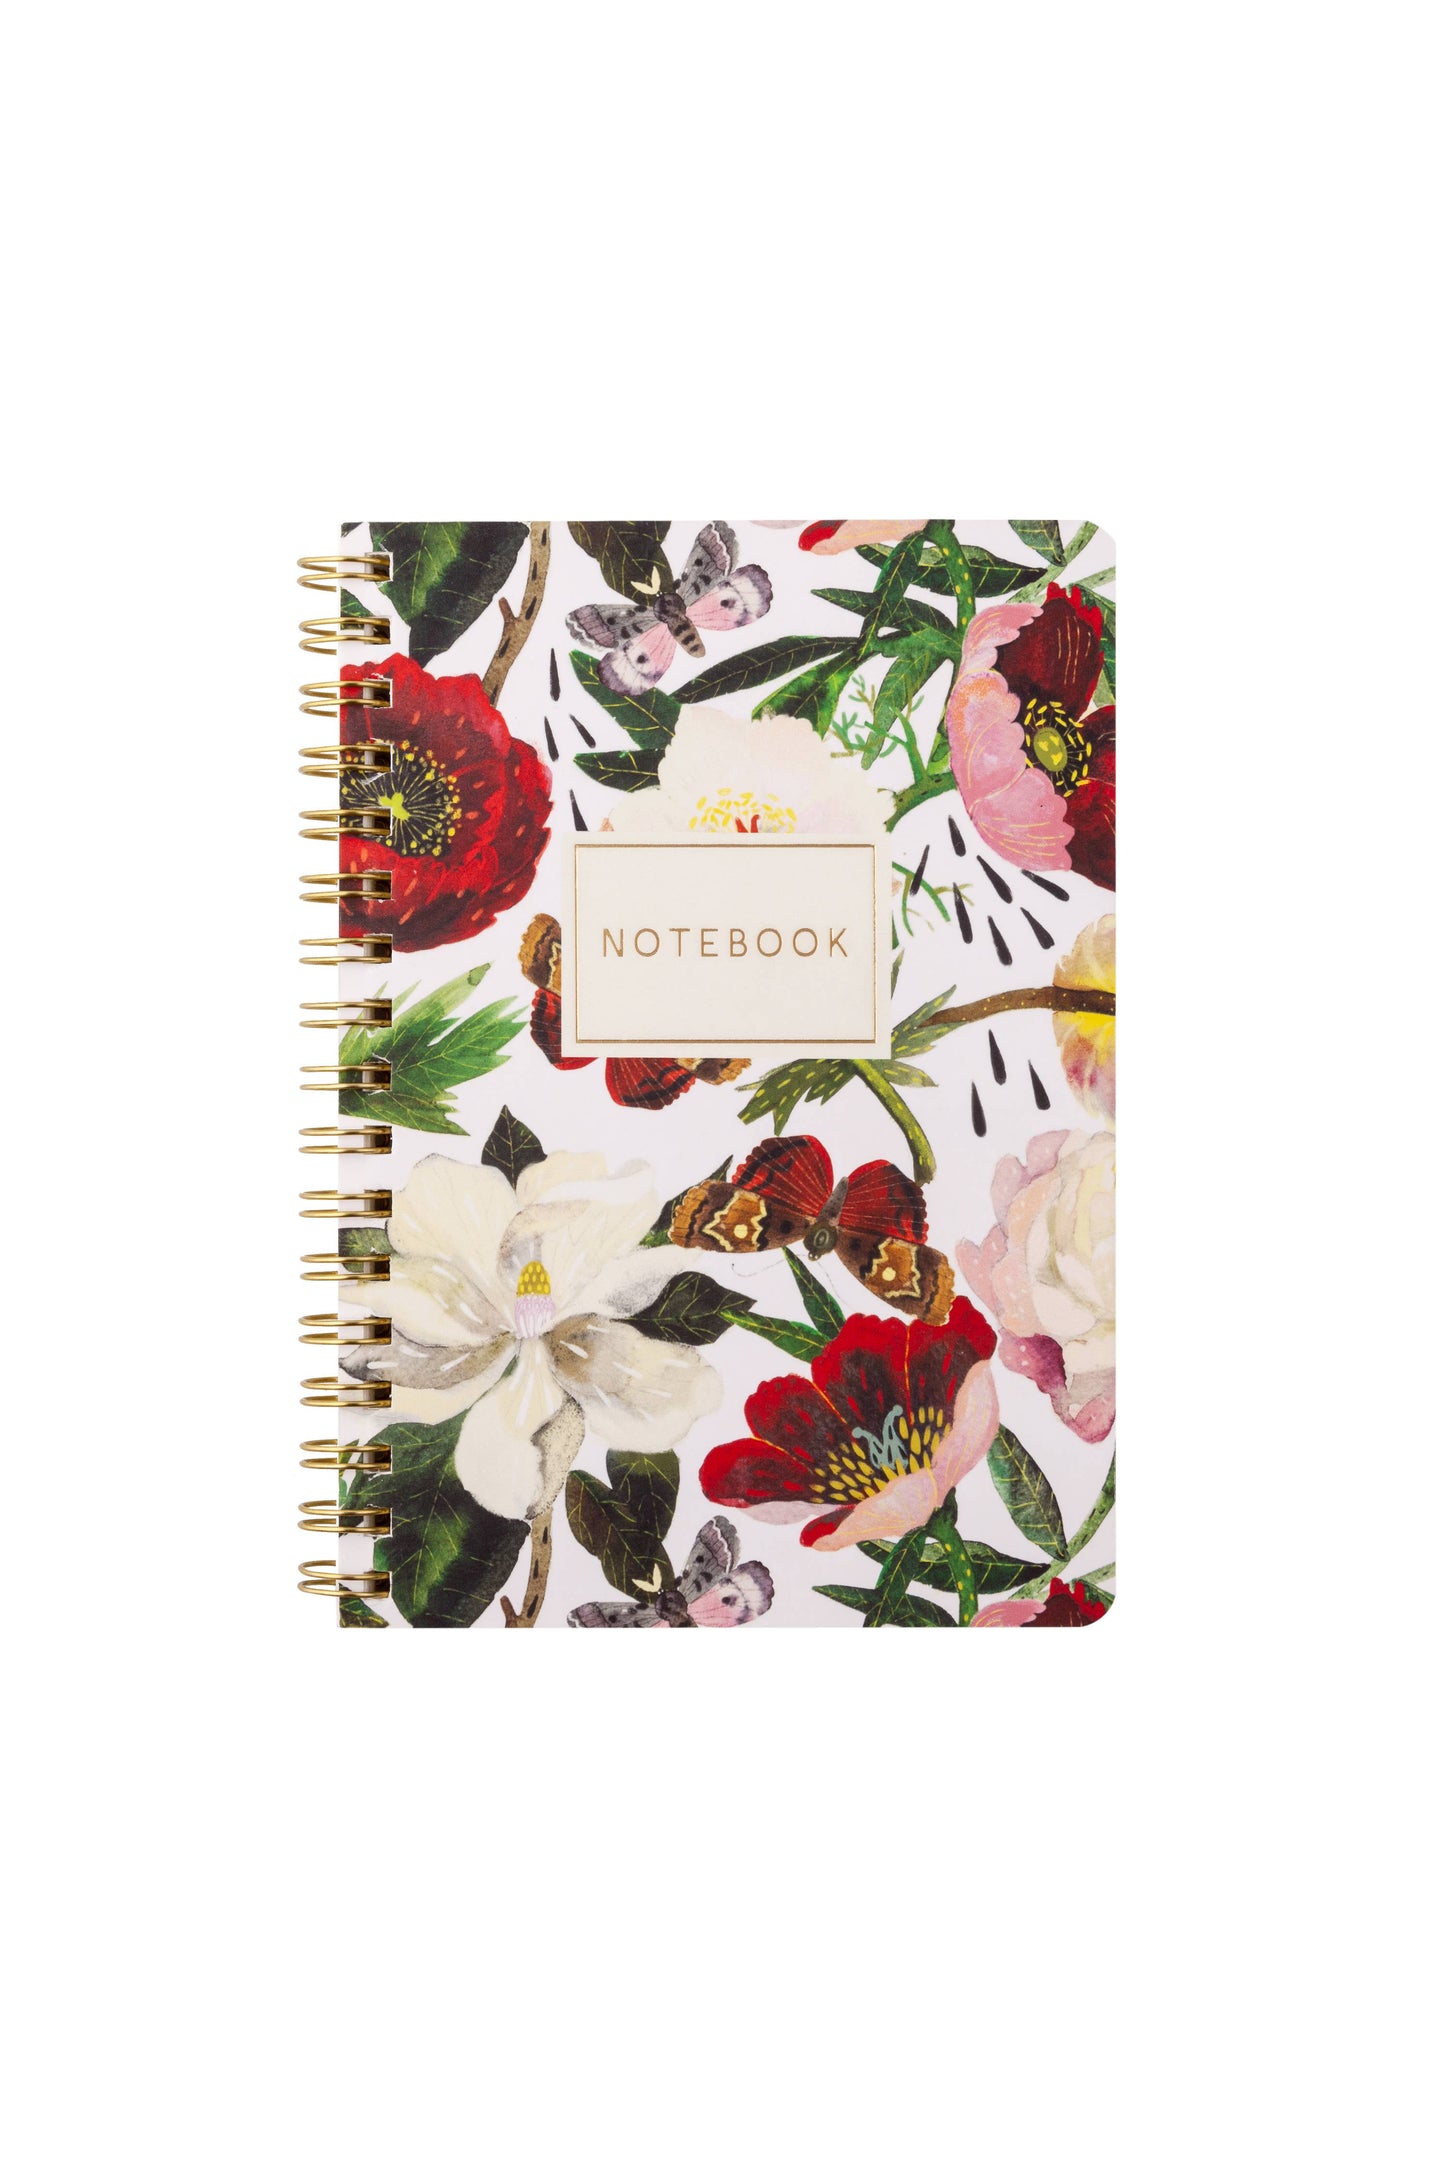 BV by Bruno Visconti - Small Spiral Notebook - Peonies